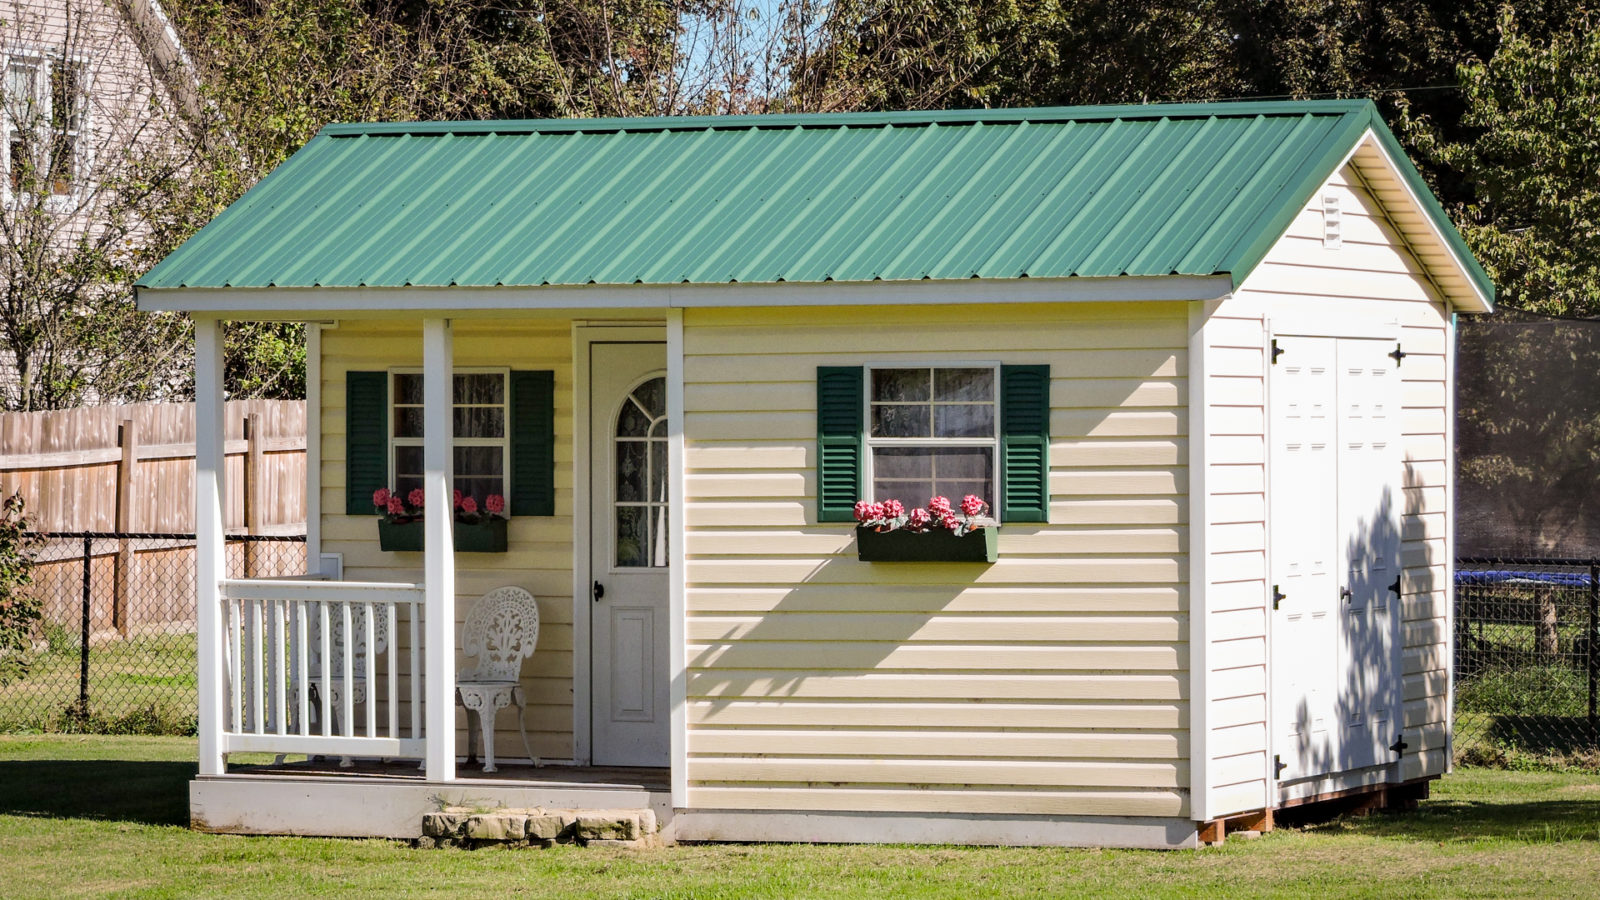 exterior of green-roofed shed with porch for sale